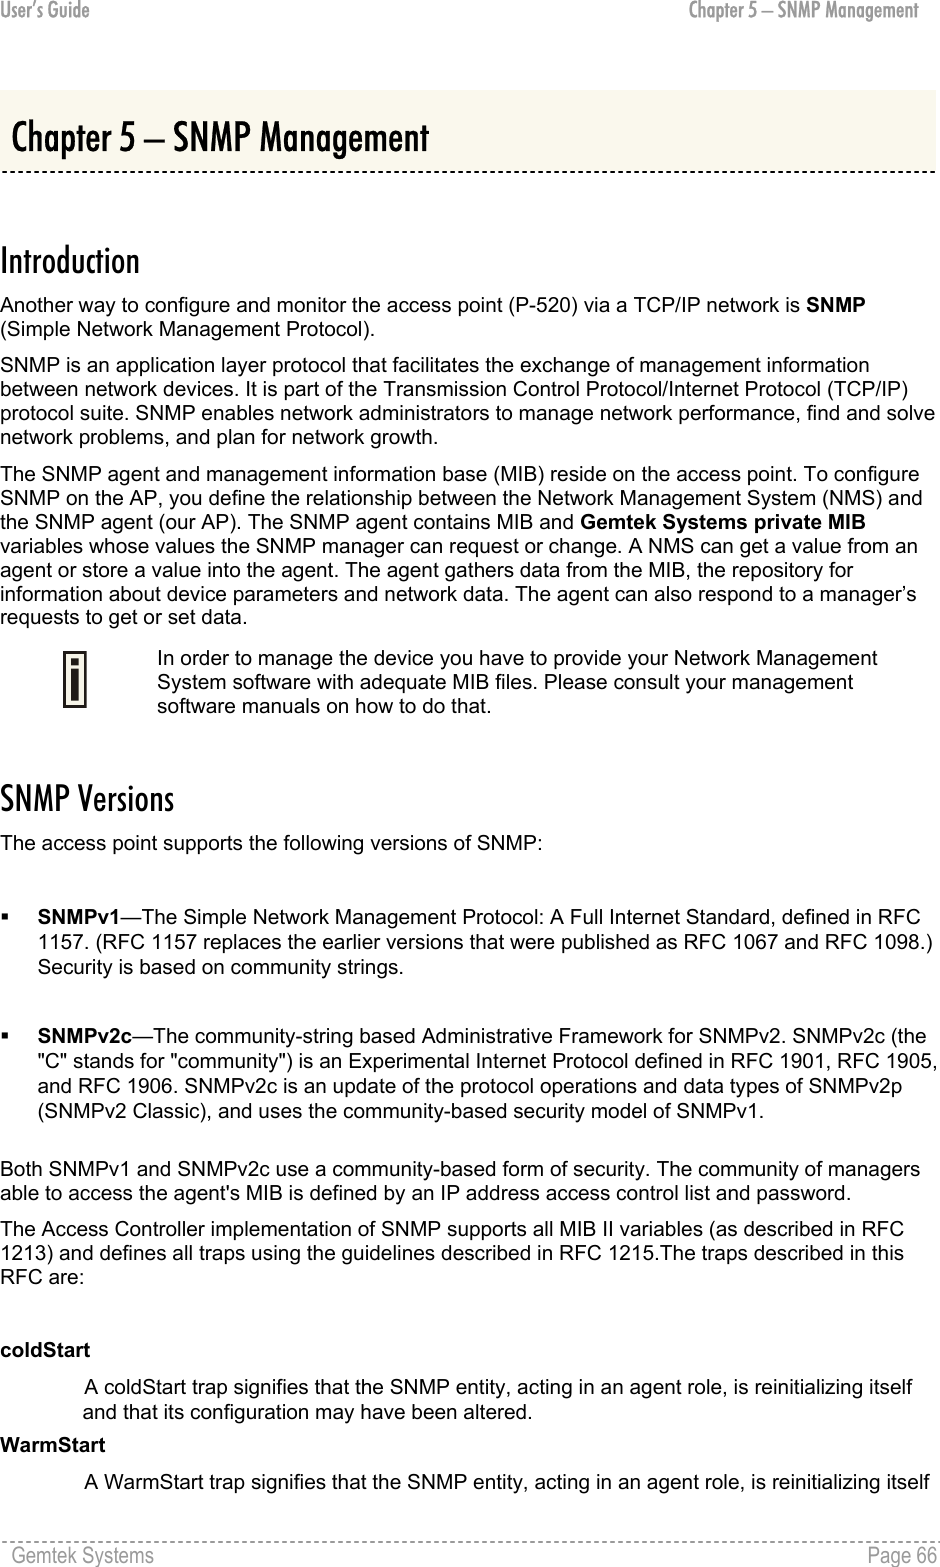 User’s Guide  Chapter 5 – SNMP Management Chapter 5 – SNMP Management  Introduction Another way to configure and monitor the access point (P-520) via a TCP/IP network is SNMP (Simple Network Management Protocol). SNMP is an application layer protocol that facilitates the exchange of management information between network devices. It is part of the Transmission Control Protocol/Internet Protocol (TCP/IP) protocol suite. SNMP enables network administrators to manage network performance, find and solve network problems, and plan for network growth. The SNMP agent and management information base (MIB) reside on the access point. To configure SNMP on the AP, you define the relationship between the Network Management System (NMS) and the SNMP agent (our AP). The SNMP agent contains MIB and Gemtek Systems private MIB variables whose values the SNMP manager can request or change. A NMS can get a value from an agent or store a value into the agent. The agent gathers data from the MIB, the repository for information about device parameters and network data. The agent can also respond to a manager’s requests to get or set data.  In order to manage the device you have to provide your Network Management System software with adequate MIB files. Please consult your management software manuals on how to do that.  SNMP Versions The access point supports the following versions of SNMP:    SNMPv1—The Simple Network Management Protocol: A Full Internet Standard, defined in RFC 1157. (RFC 1157 replaces the earlier versions that were published as RFC 1067 and RFC 1098.) Security is based on community strings.     SNMPv2c—The community-string based Administrative Framework for SNMPv2. SNMPv2c (the &quot;C&quot; stands for &quot;community&quot;) is an Experimental Internet Protocol defined in RFC 1901, RFC 1905, and RFC 1906. SNMPv2c is an update of the protocol operations and data types of SNMPv2p (SNMPv2 Classic), and uses the community-based security model of SNMPv1.  Both SNMPv1 and SNMPv2c use a community-based form of security. The community of managers able to access the agent&apos;s MIB is defined by an IP address access control list and password. The Access Controller implementation of SNMP supports all MIB II variables (as described in RFC 1213) and defines all traps using the guidelines described in RFC 1215.The traps described in this RFC are:  coldStart A coldStart trap signifies that the SNMP entity, acting in an agent role, is reinitializing itself and that its configuration may have been altered. WarmStart A WarmStart trap signifies that the SNMP entity, acting in an agent role, is reinitializing itself Gemtek Systems    Page 66  